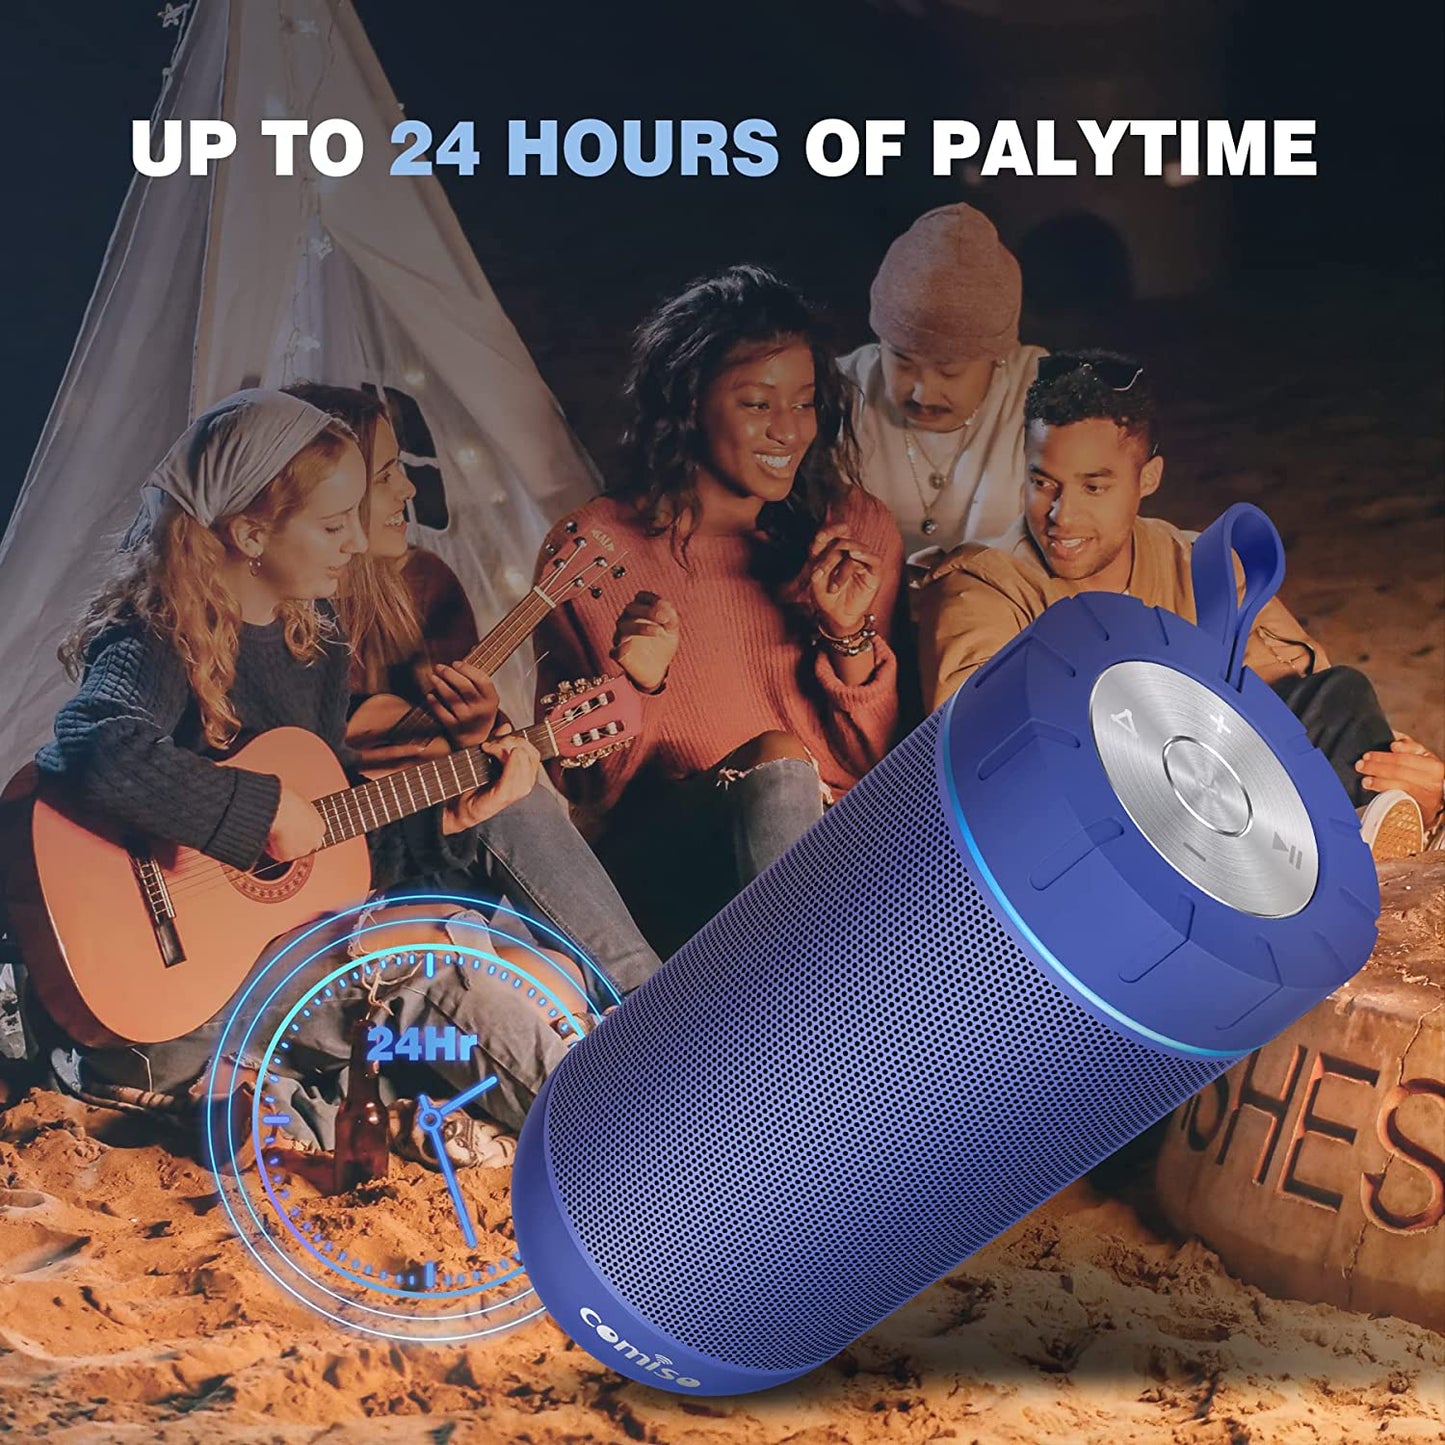 X26 Bluetooth Speaker, IPX4 Waterproof Speakers 360° HD Surround Sound with Punchy Bass, Wireless Dual Pairing, 24H Playtime, Portable Speaker for Shower, Home, Outdoor, Camping, Beach - Blue